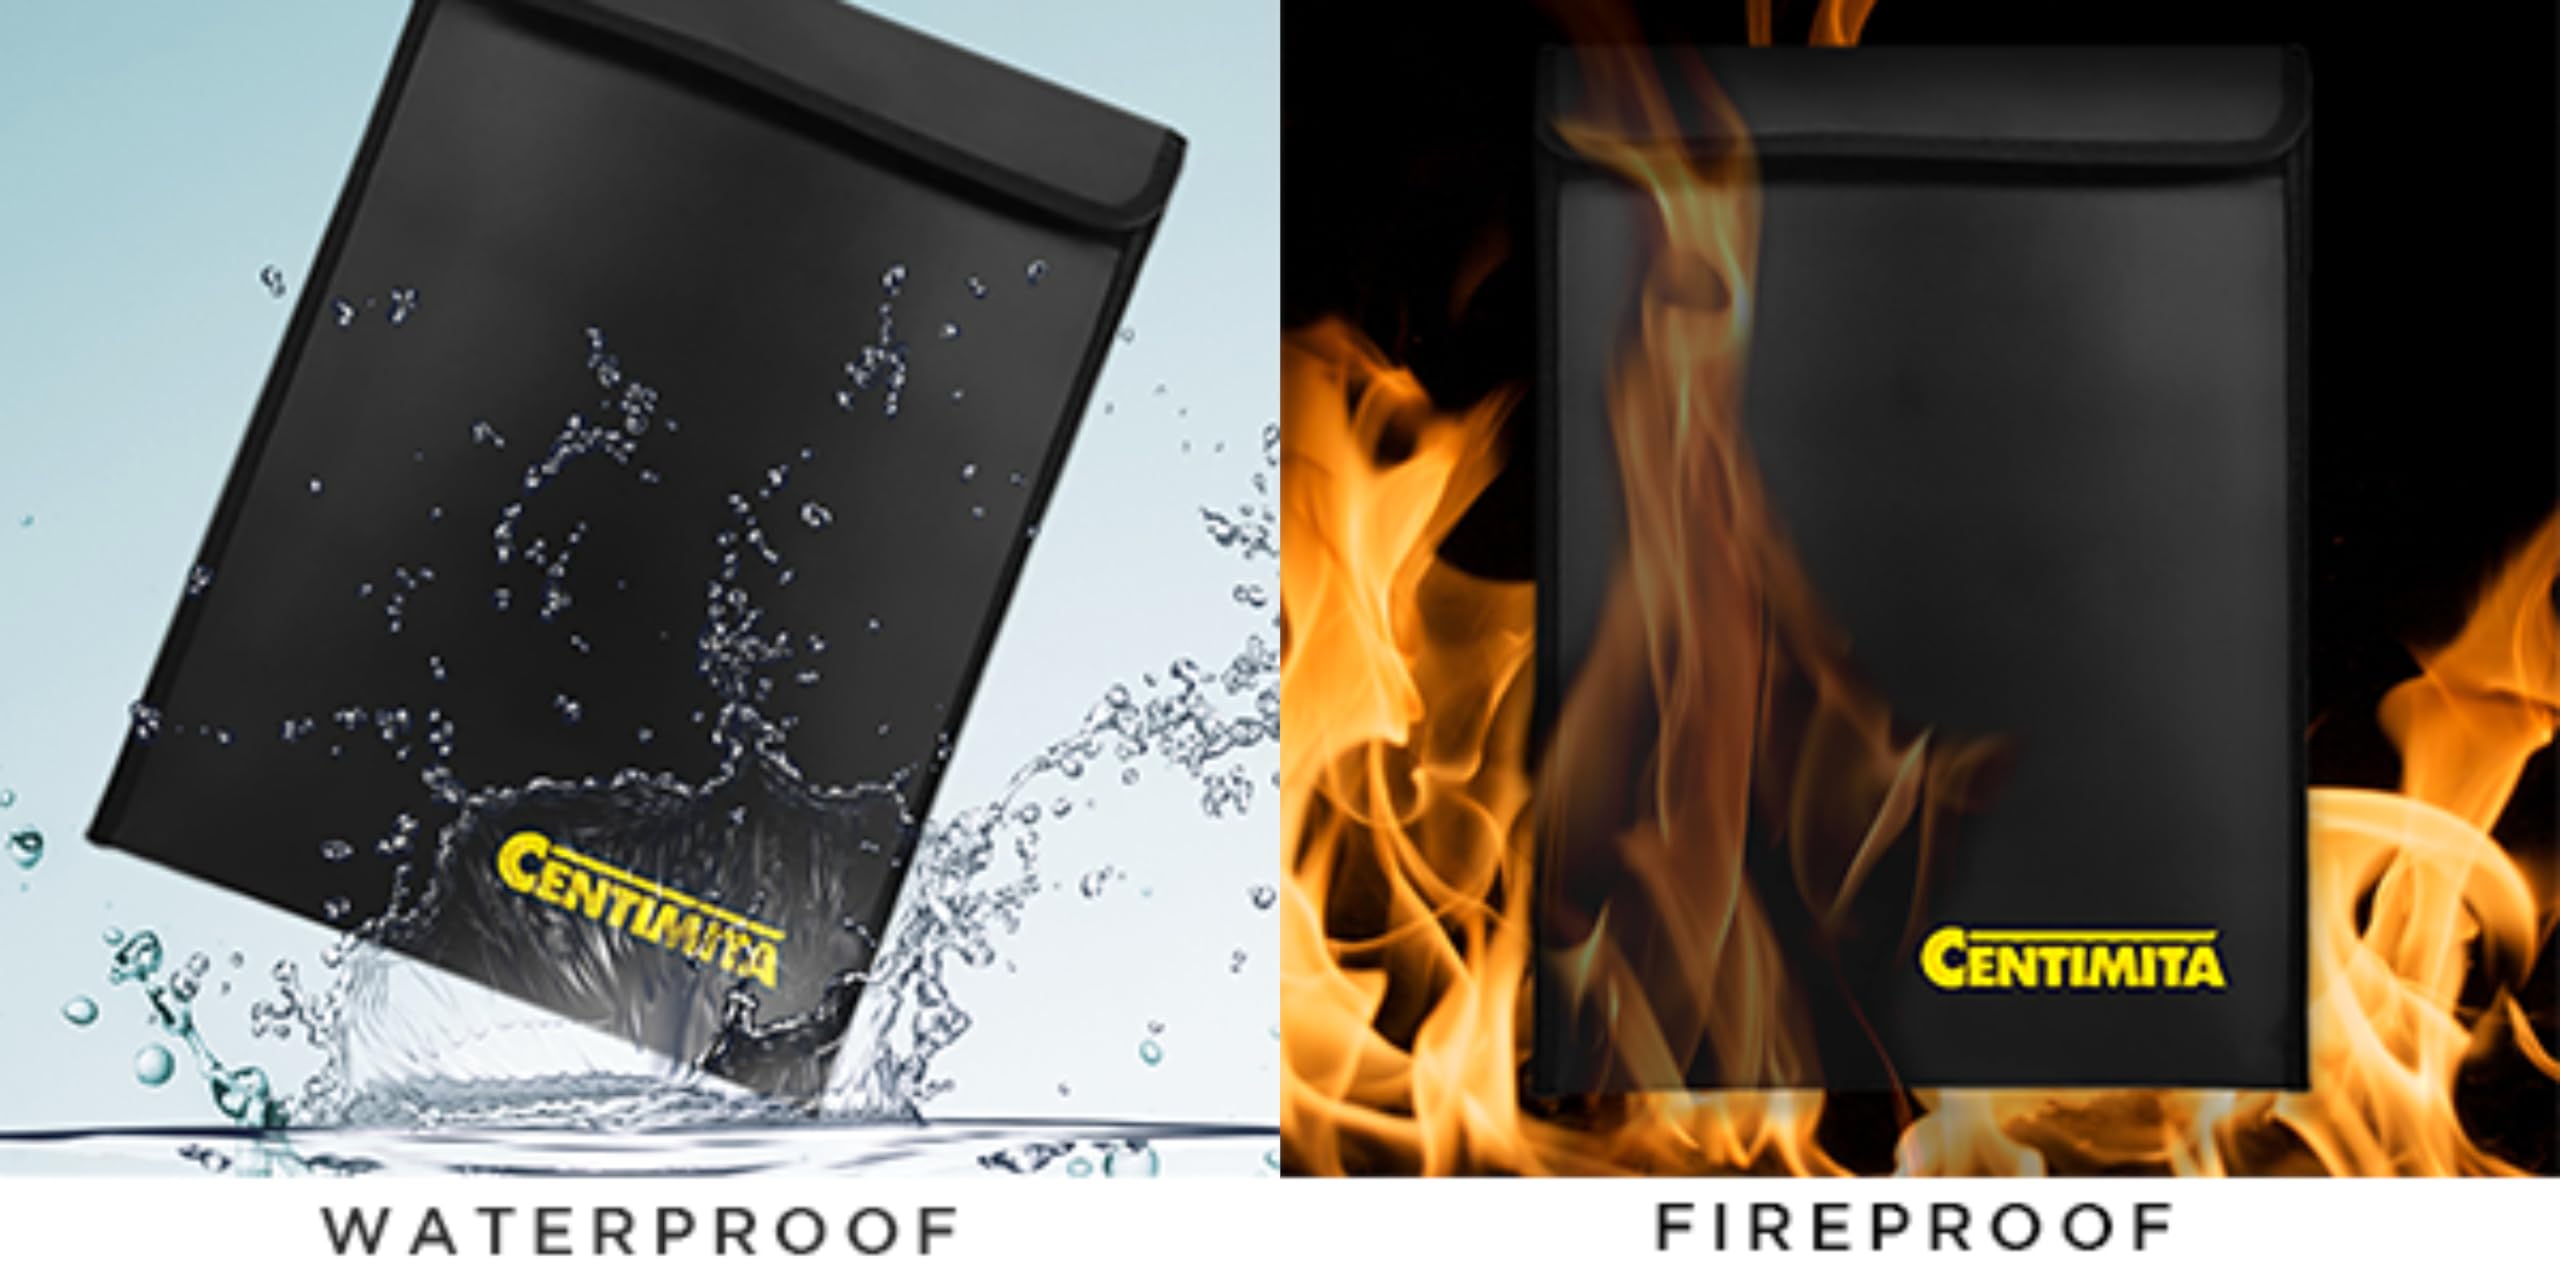 Fireproof Document Bag Waterproof Safe Folder - 2000℉ Money Bag with Zipper and 3 Document Protectors, 15”x11” Fire Proof/Waterproof Safe Bag, Important Document Holder, Fireproof Pouch,Fire Envelope